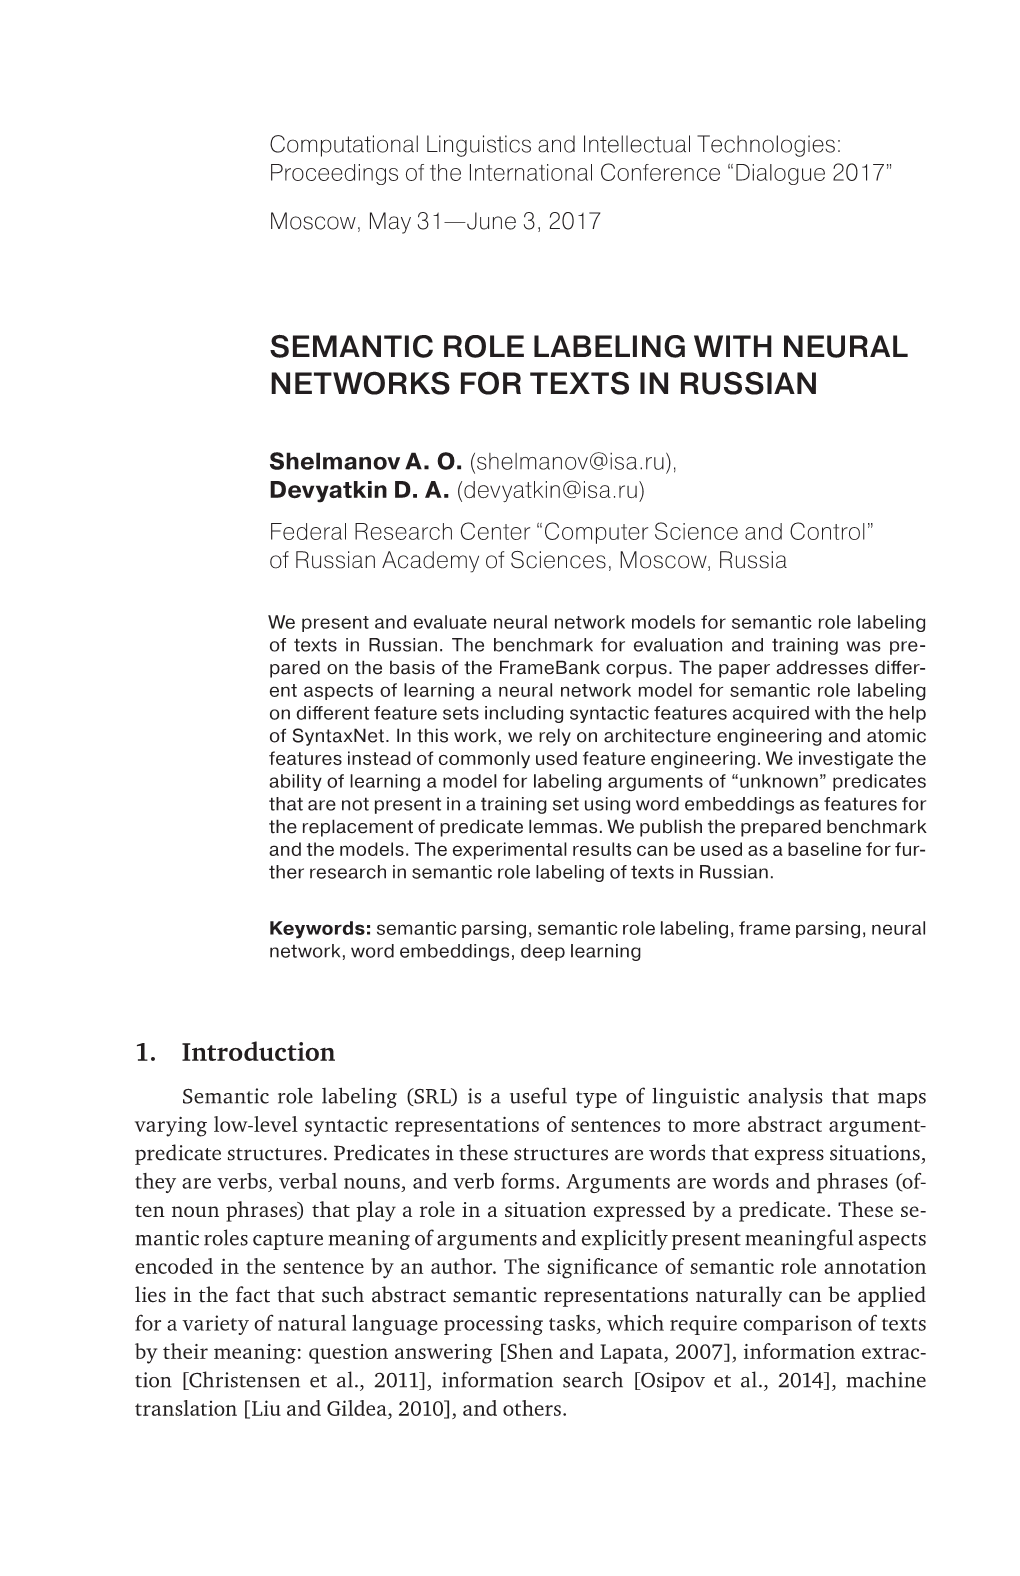 Semantic Role Labeling with Neural Networks for Texts in Russian